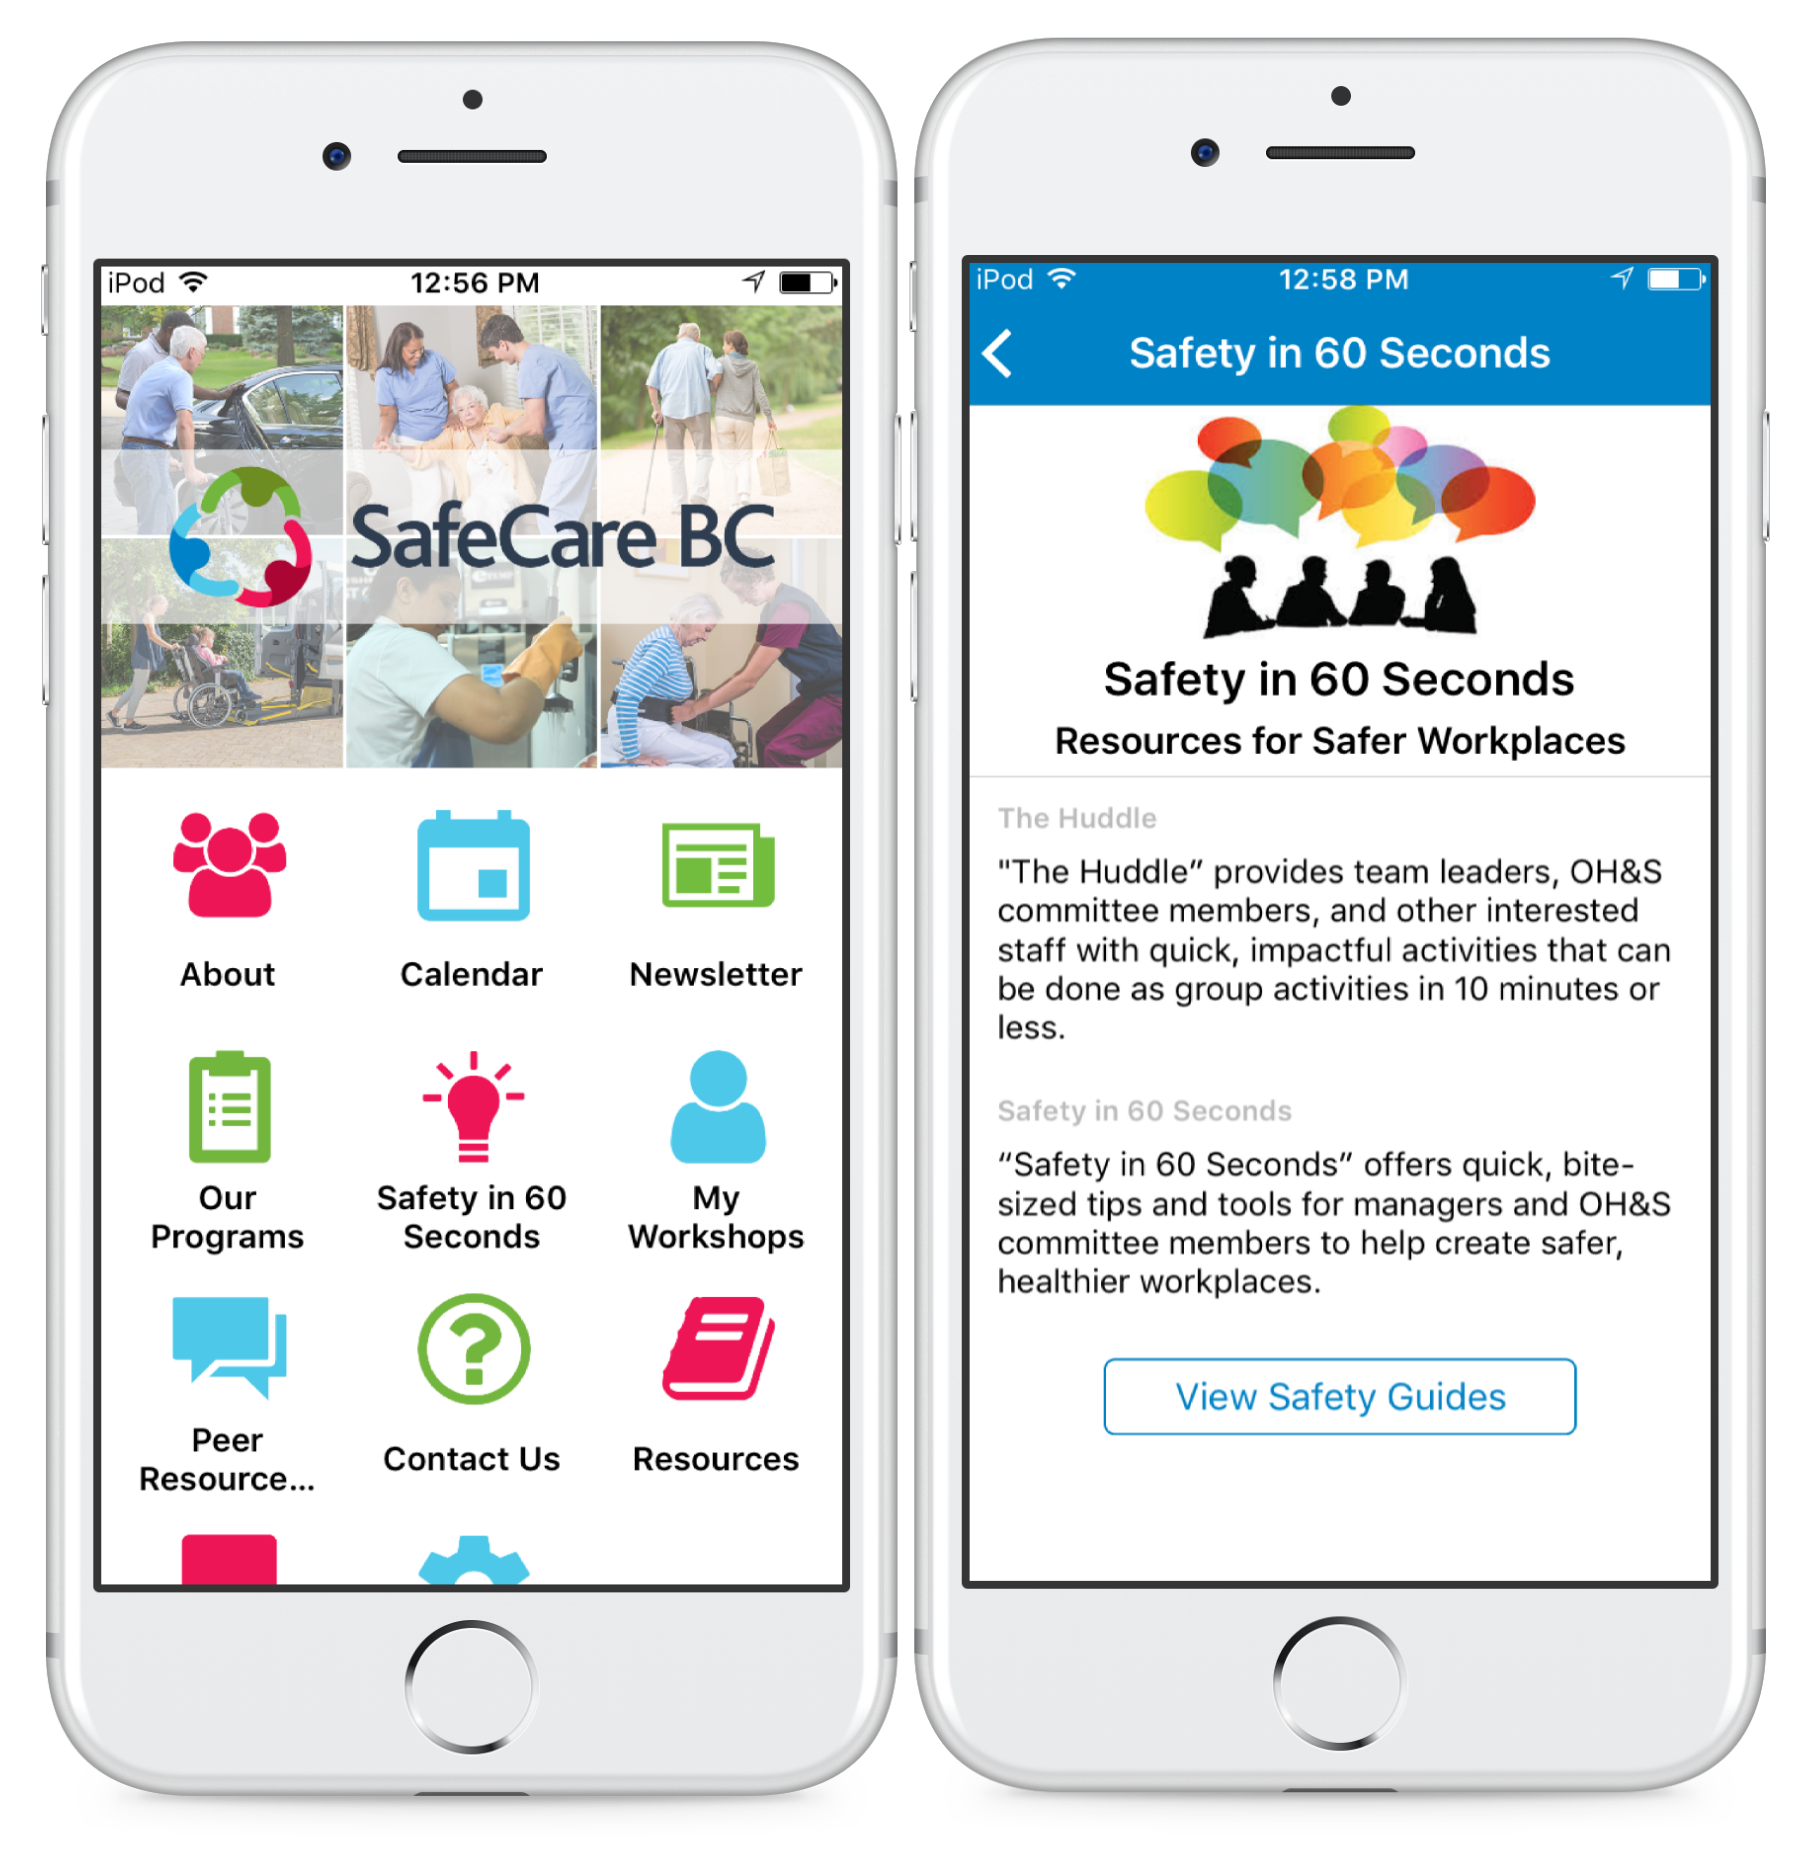 Info Grove App Save Care BC App Feature Page and Safety in 60 Seconds